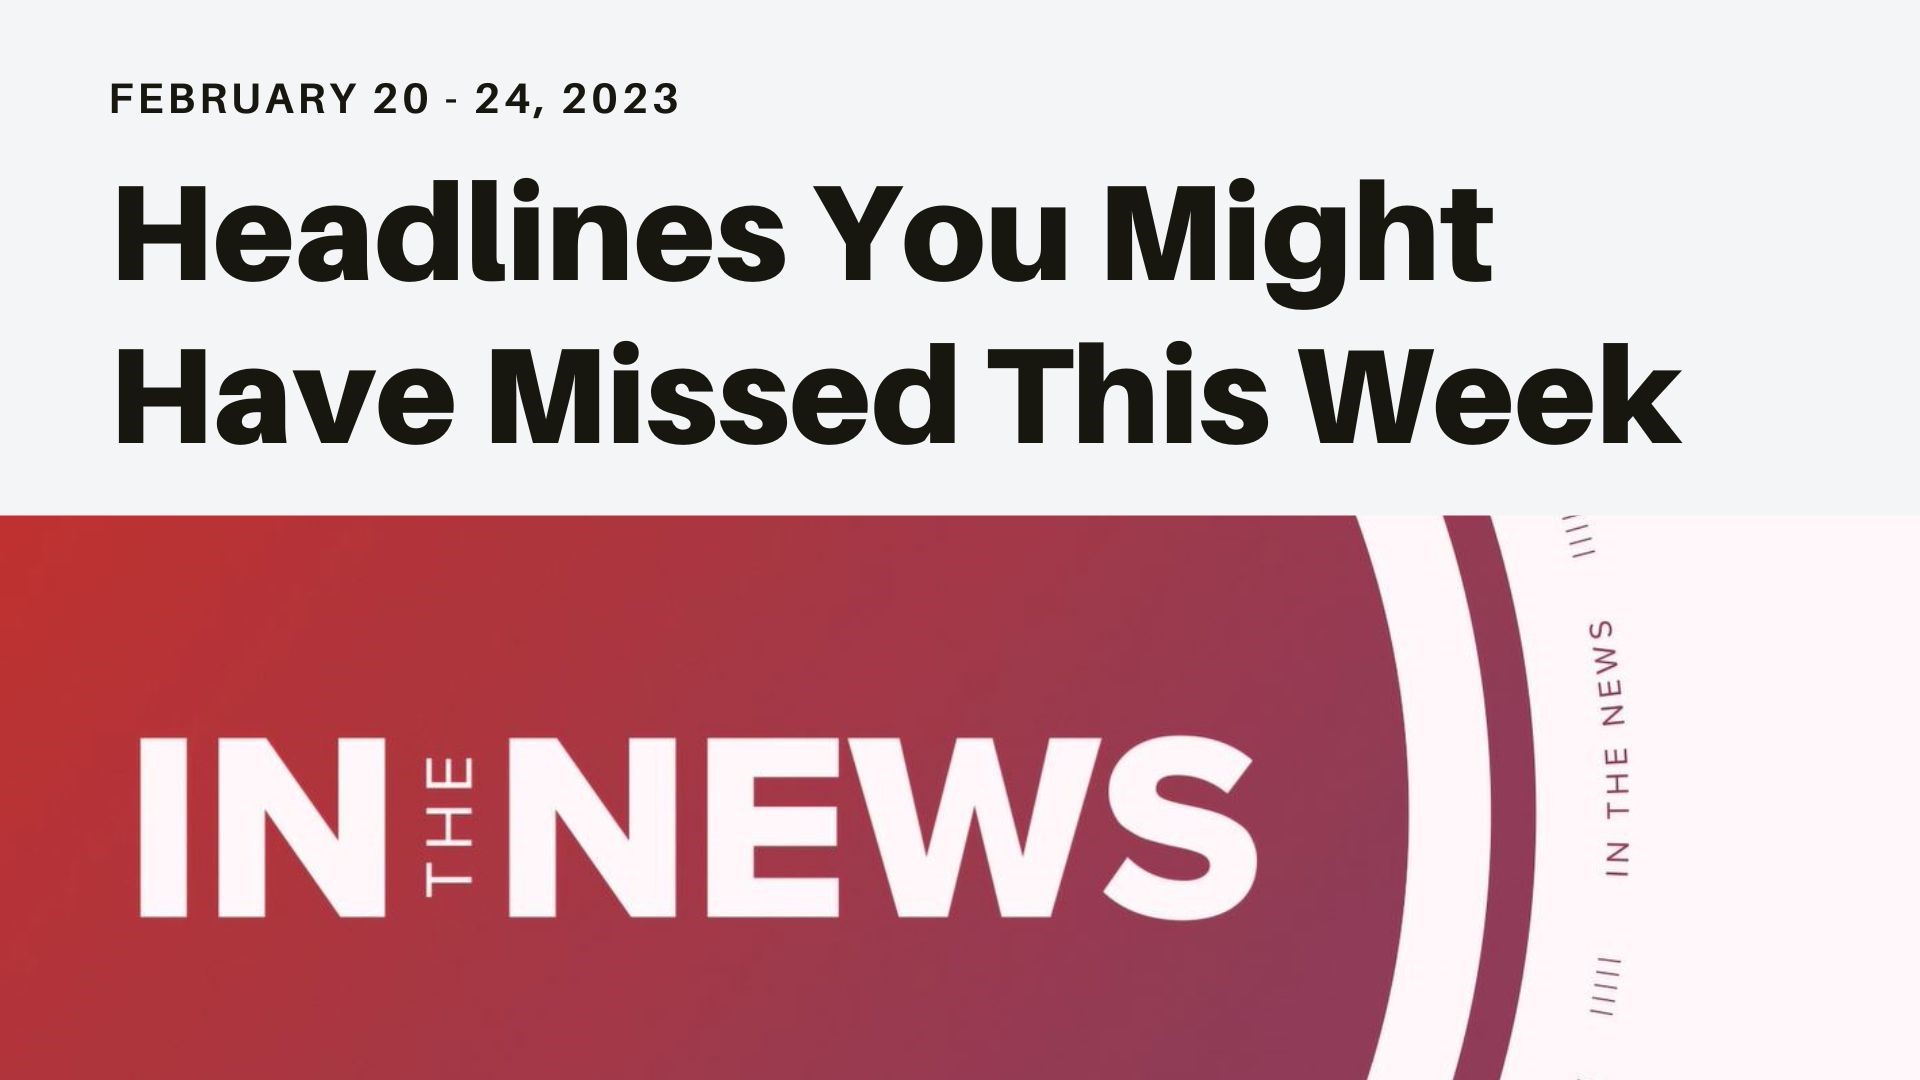 A look at some of the news headlines you might have missed from the week from marking one year since Russia invaded Ukraine to flight seating changes and more.